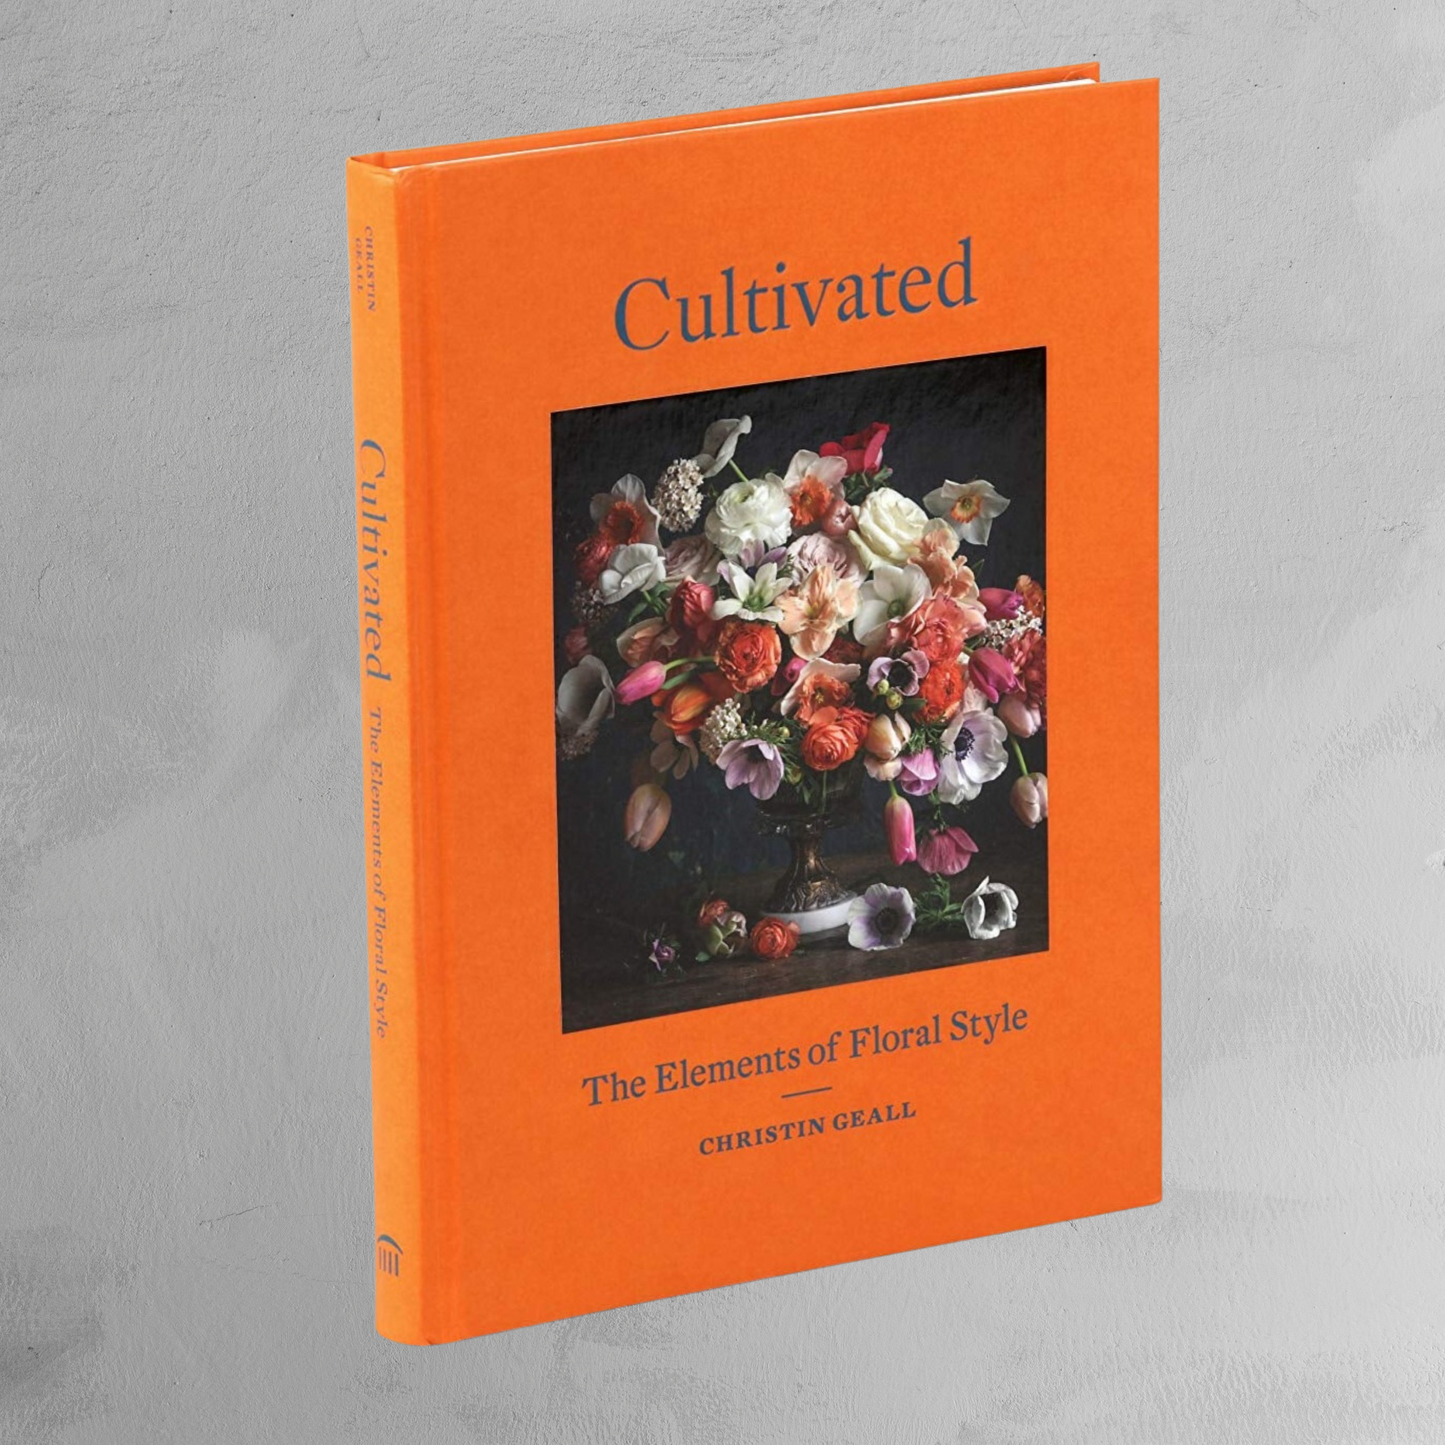 Book - Cultivated: The Elements of Floral Style